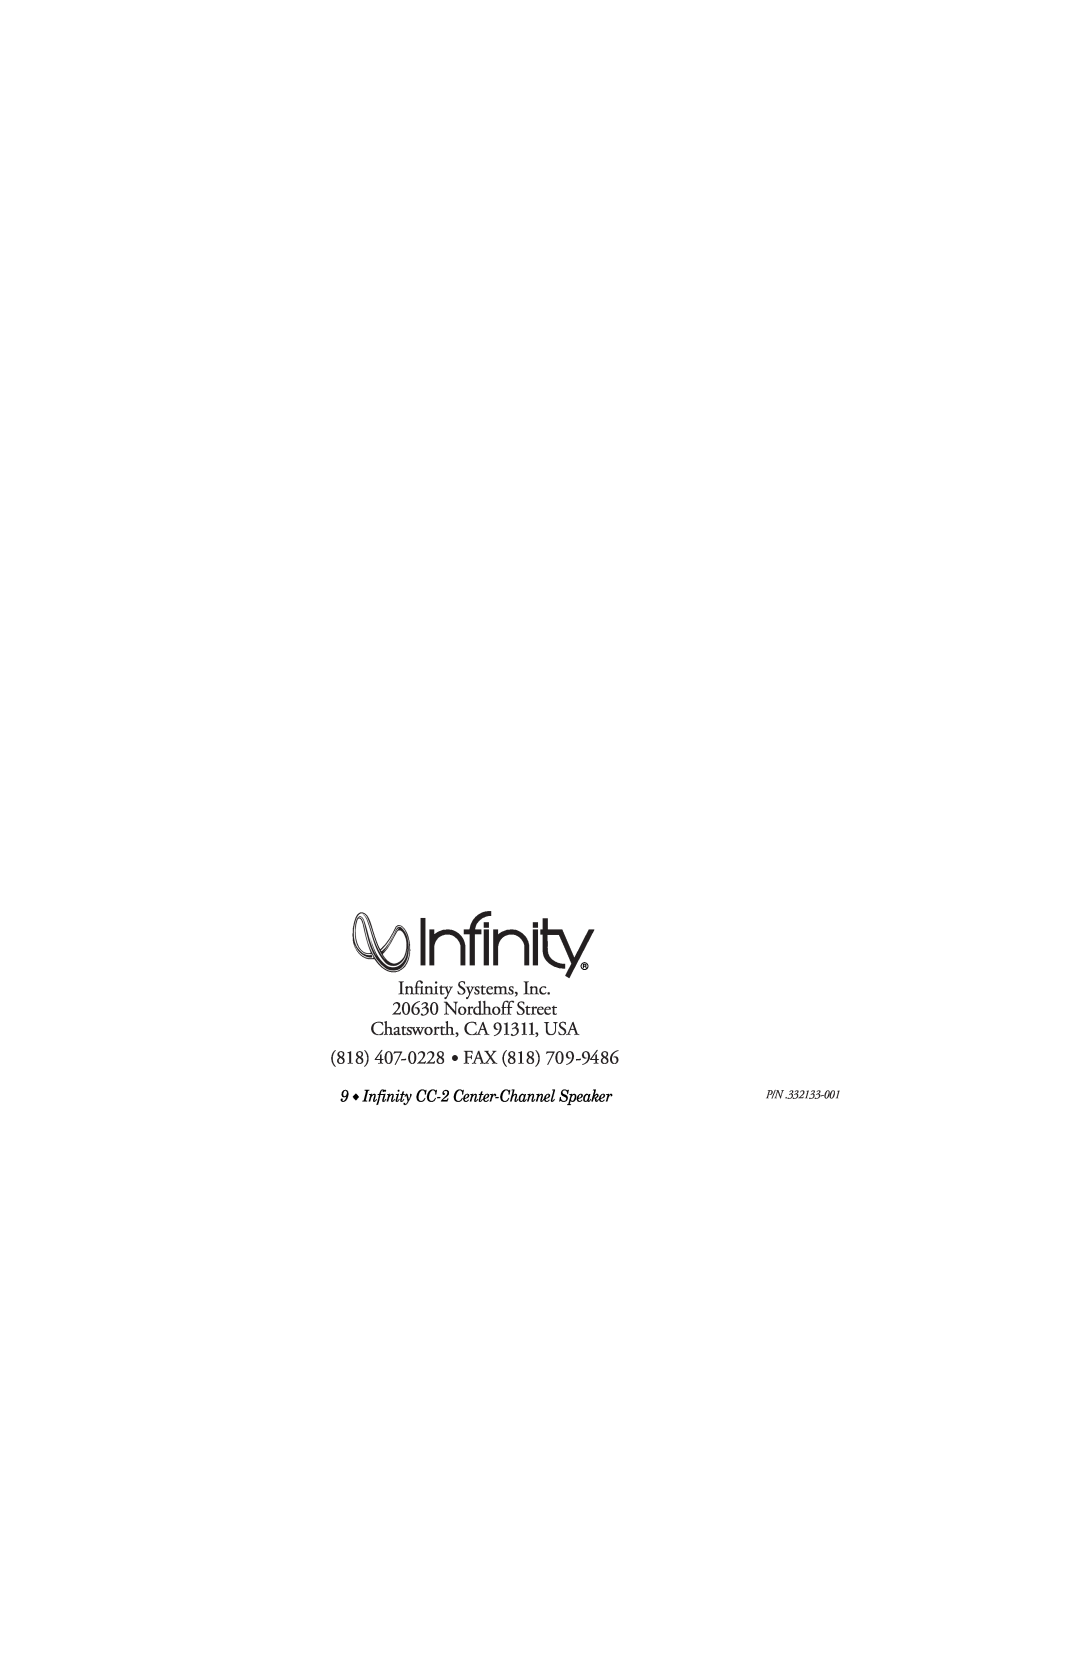 Infinity owner manual Infinity CC-2 Center-ChannelSpeaker, Infinity Systems, Inc 20630 Nordhoff Street 